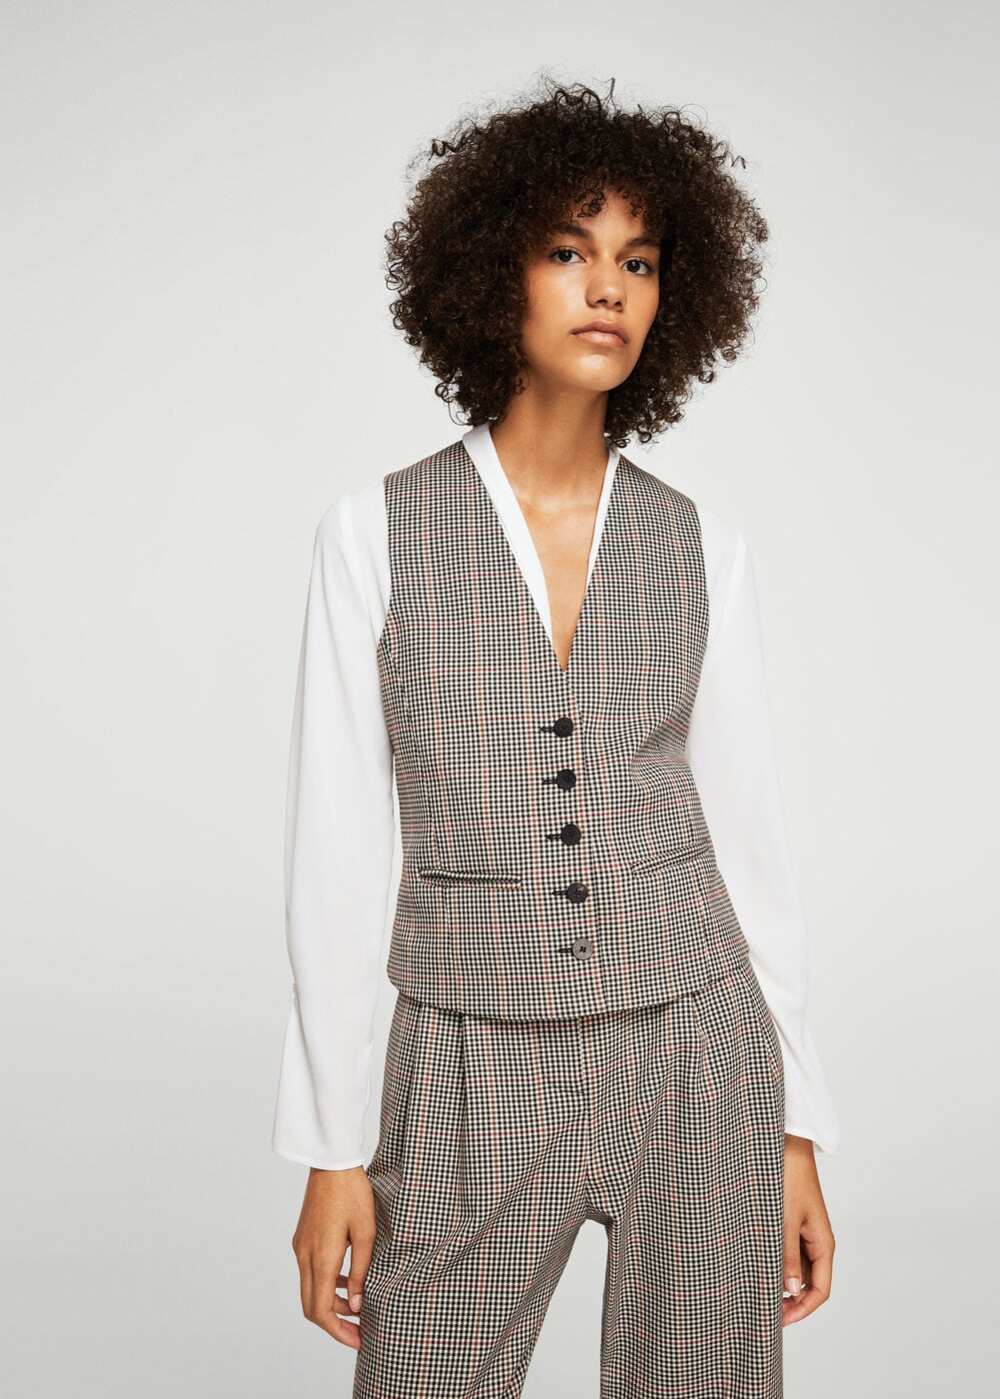 New waistcoat styles for men and women